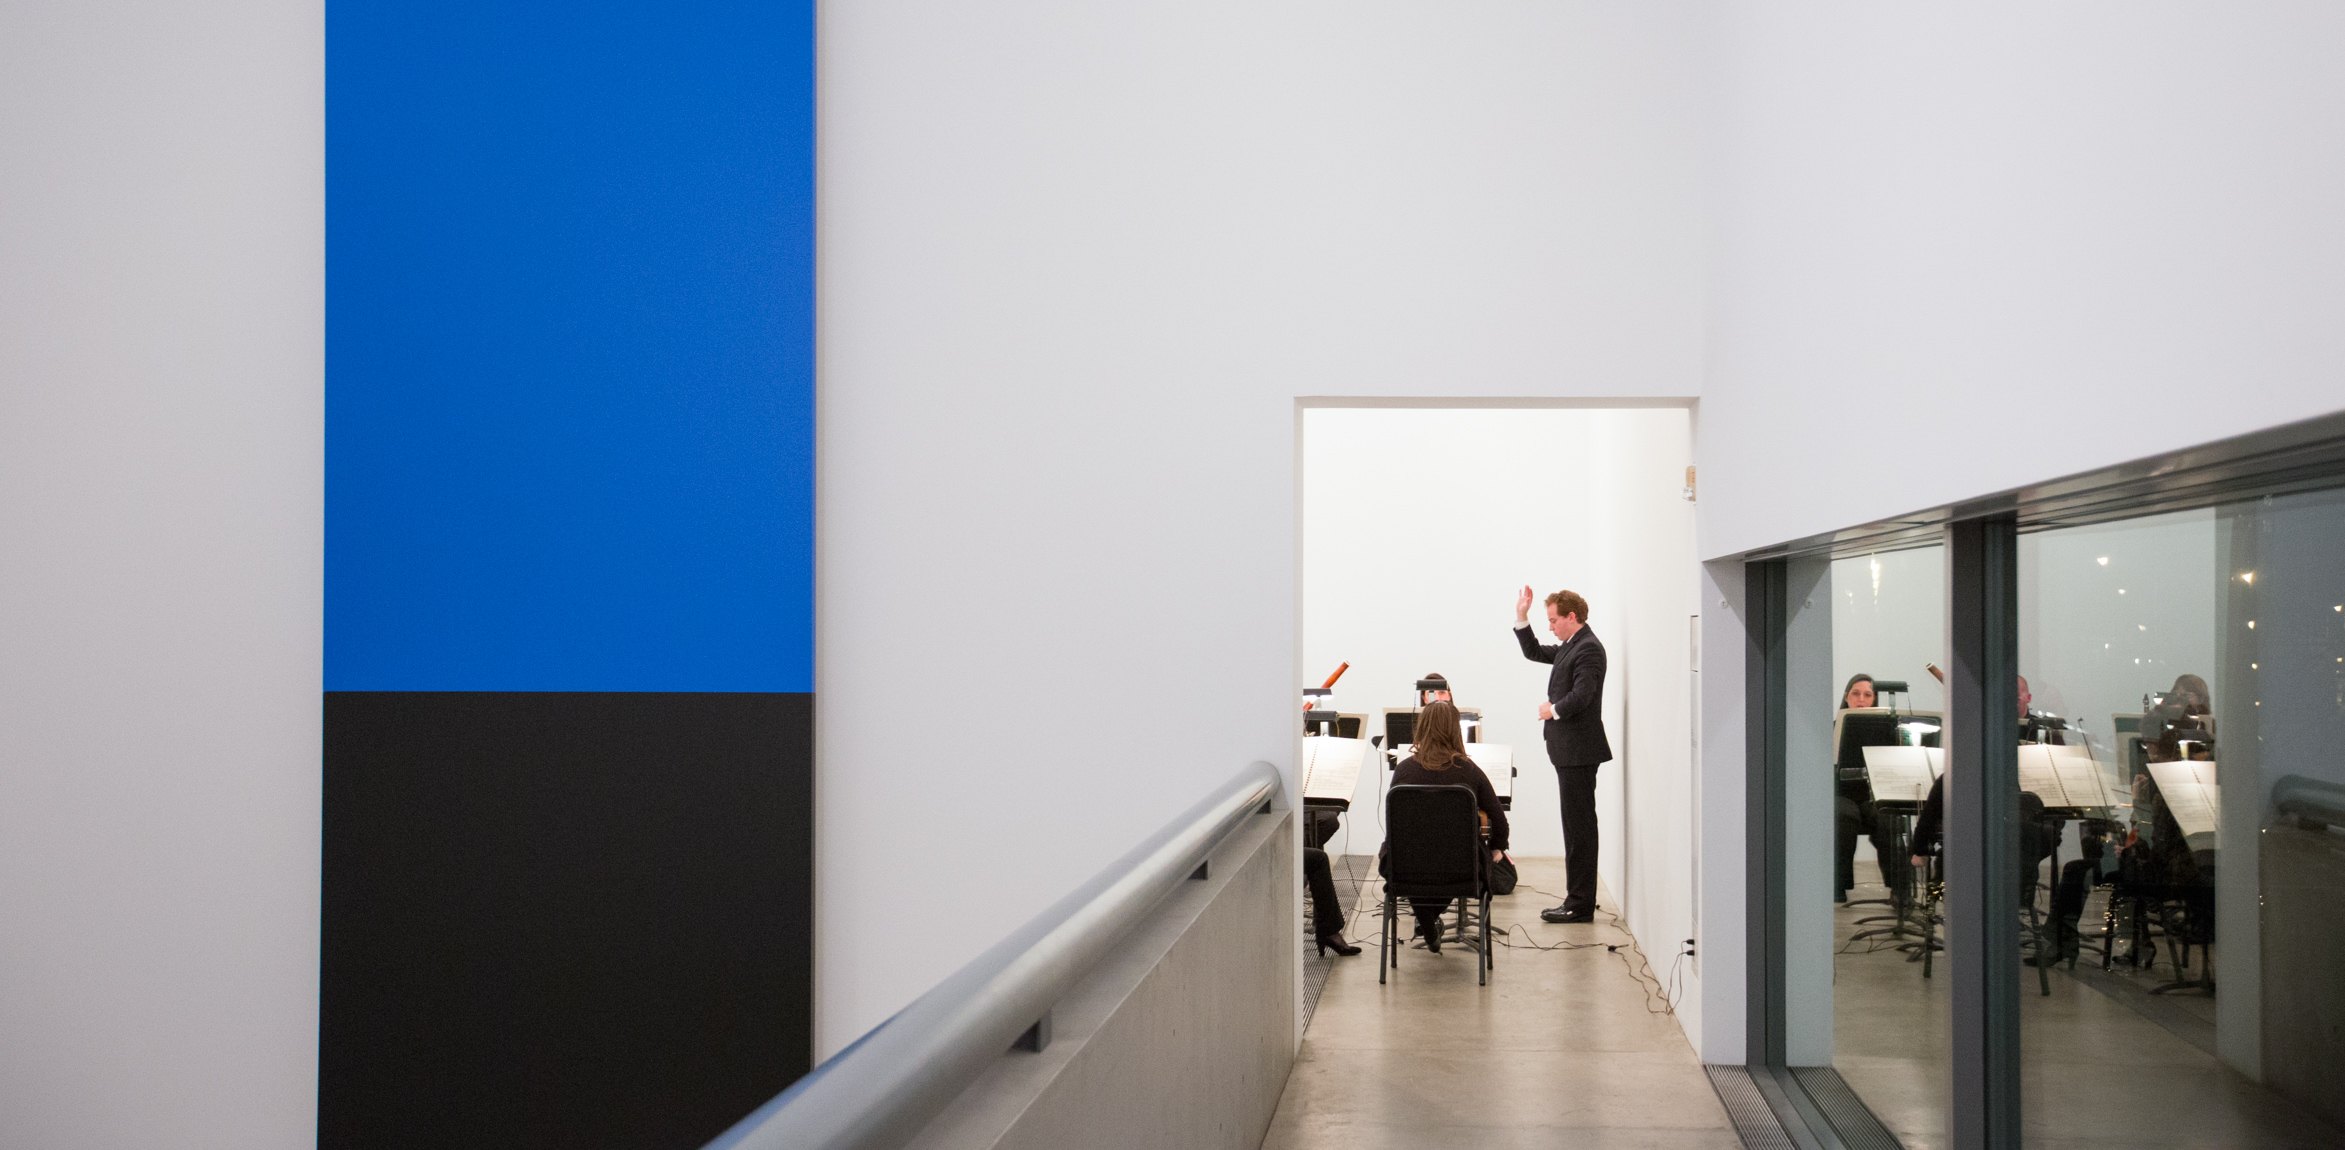 A view from the Main Gallery corridor of a conductor and symphony performing in the Cube Gallery. To the left is Ellsworth Kelly's 